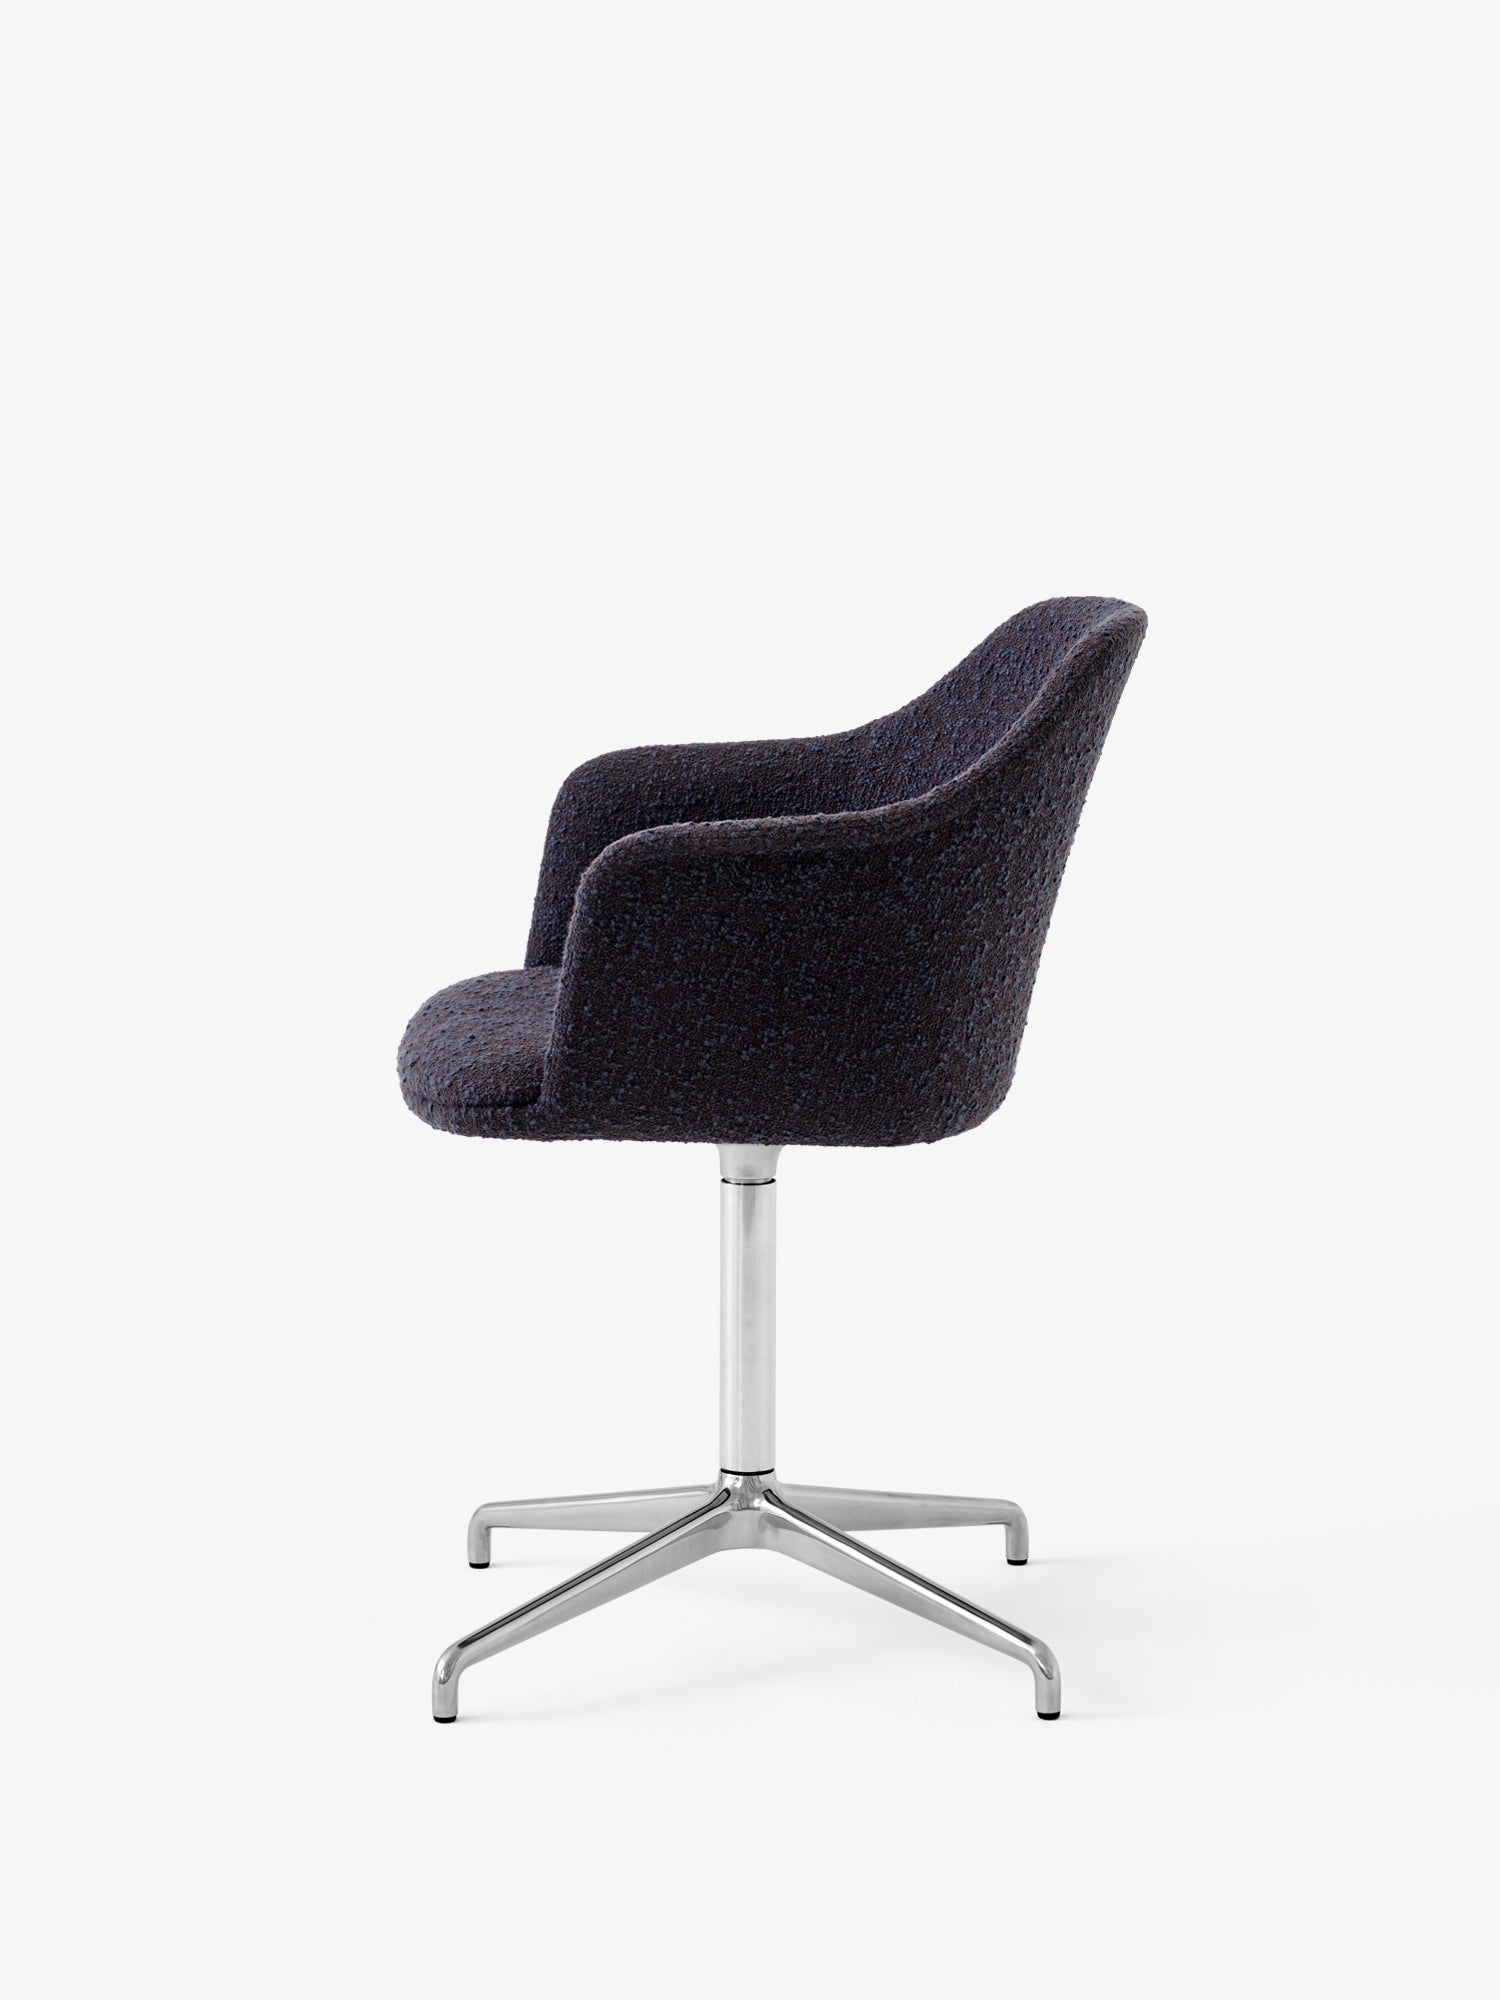 Rely HW41 Armchair with Seat Cushion